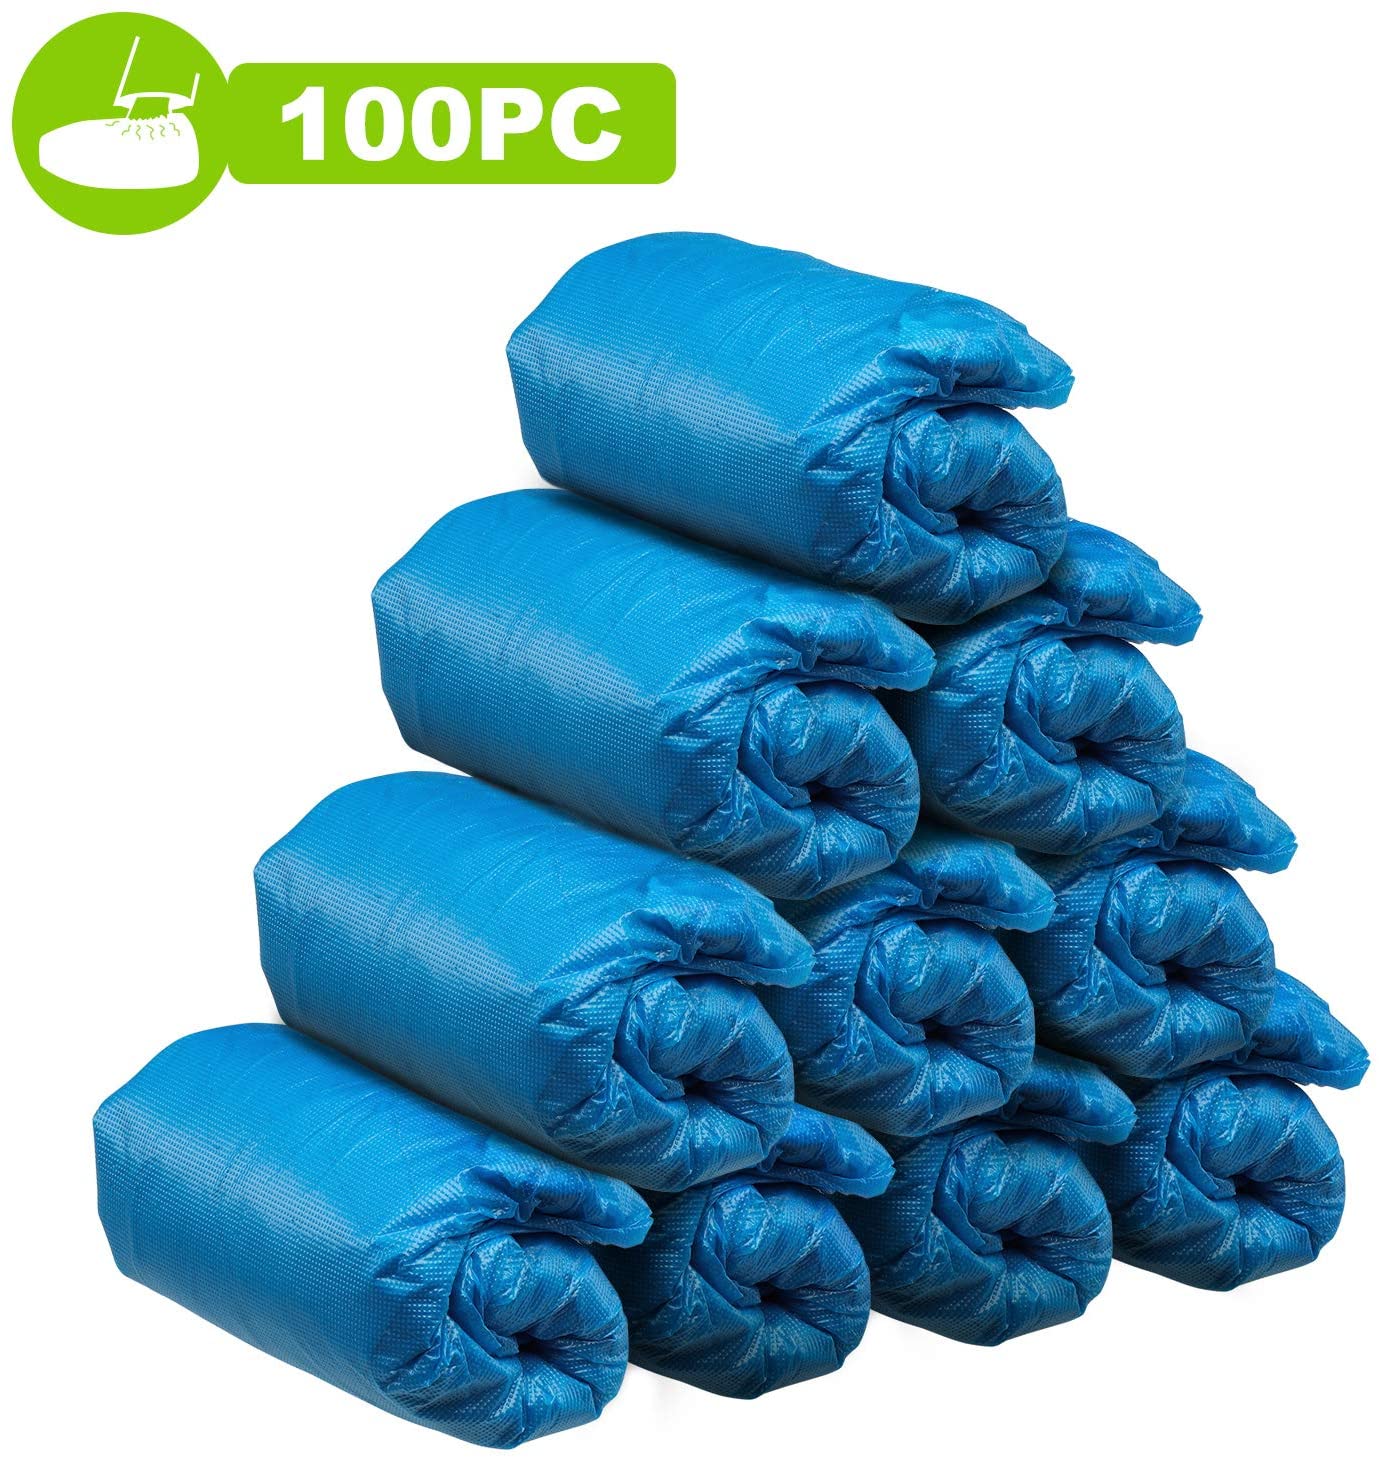 Disposable CPE Plastic waterproof Shoe Cover